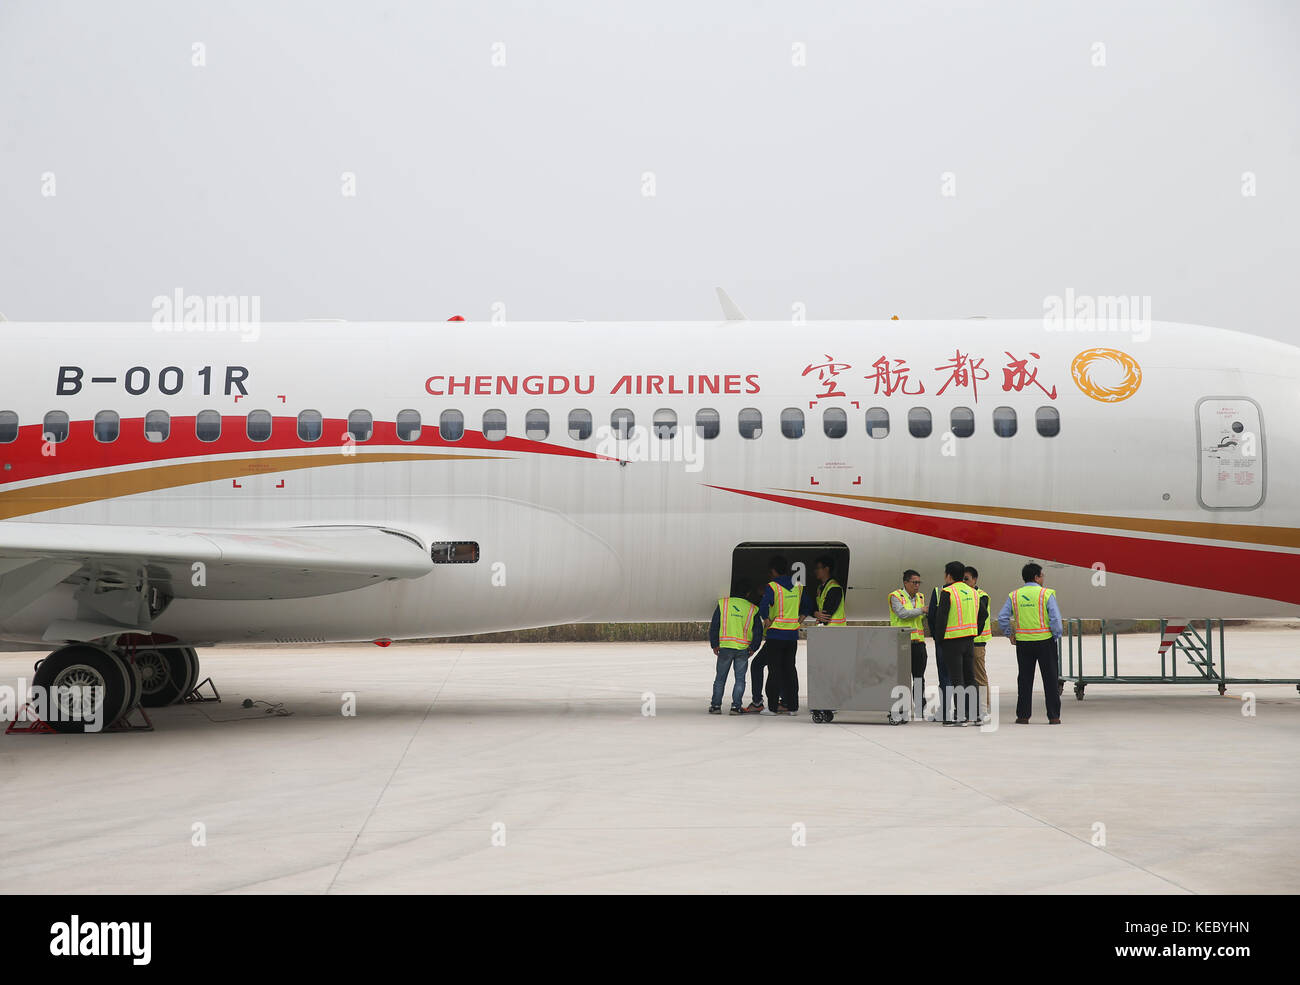 (171019) -- SHANGHAI, Oct. 19, 2017 (Xinhua) -- Photo taken on Oct. 14, 2017 shows staff workers maintaining the ARJ21-700 jetliner at Shengli Airport in Dongying of east China's Shandong Province. China's first domestic regional jetliner ARJ21-700 was delivered Thursday after its mass production was certified in July. The ARJ21-700 jetliner has 90 economy seats and was bought by China Aerospace Leasing Company, and delivered to Chengdu Airlines. The Commercial Aircraft Corporation of China (COMAC) obtained a production license to build the airliner from the General Administration of Civil Avi Stock Photo